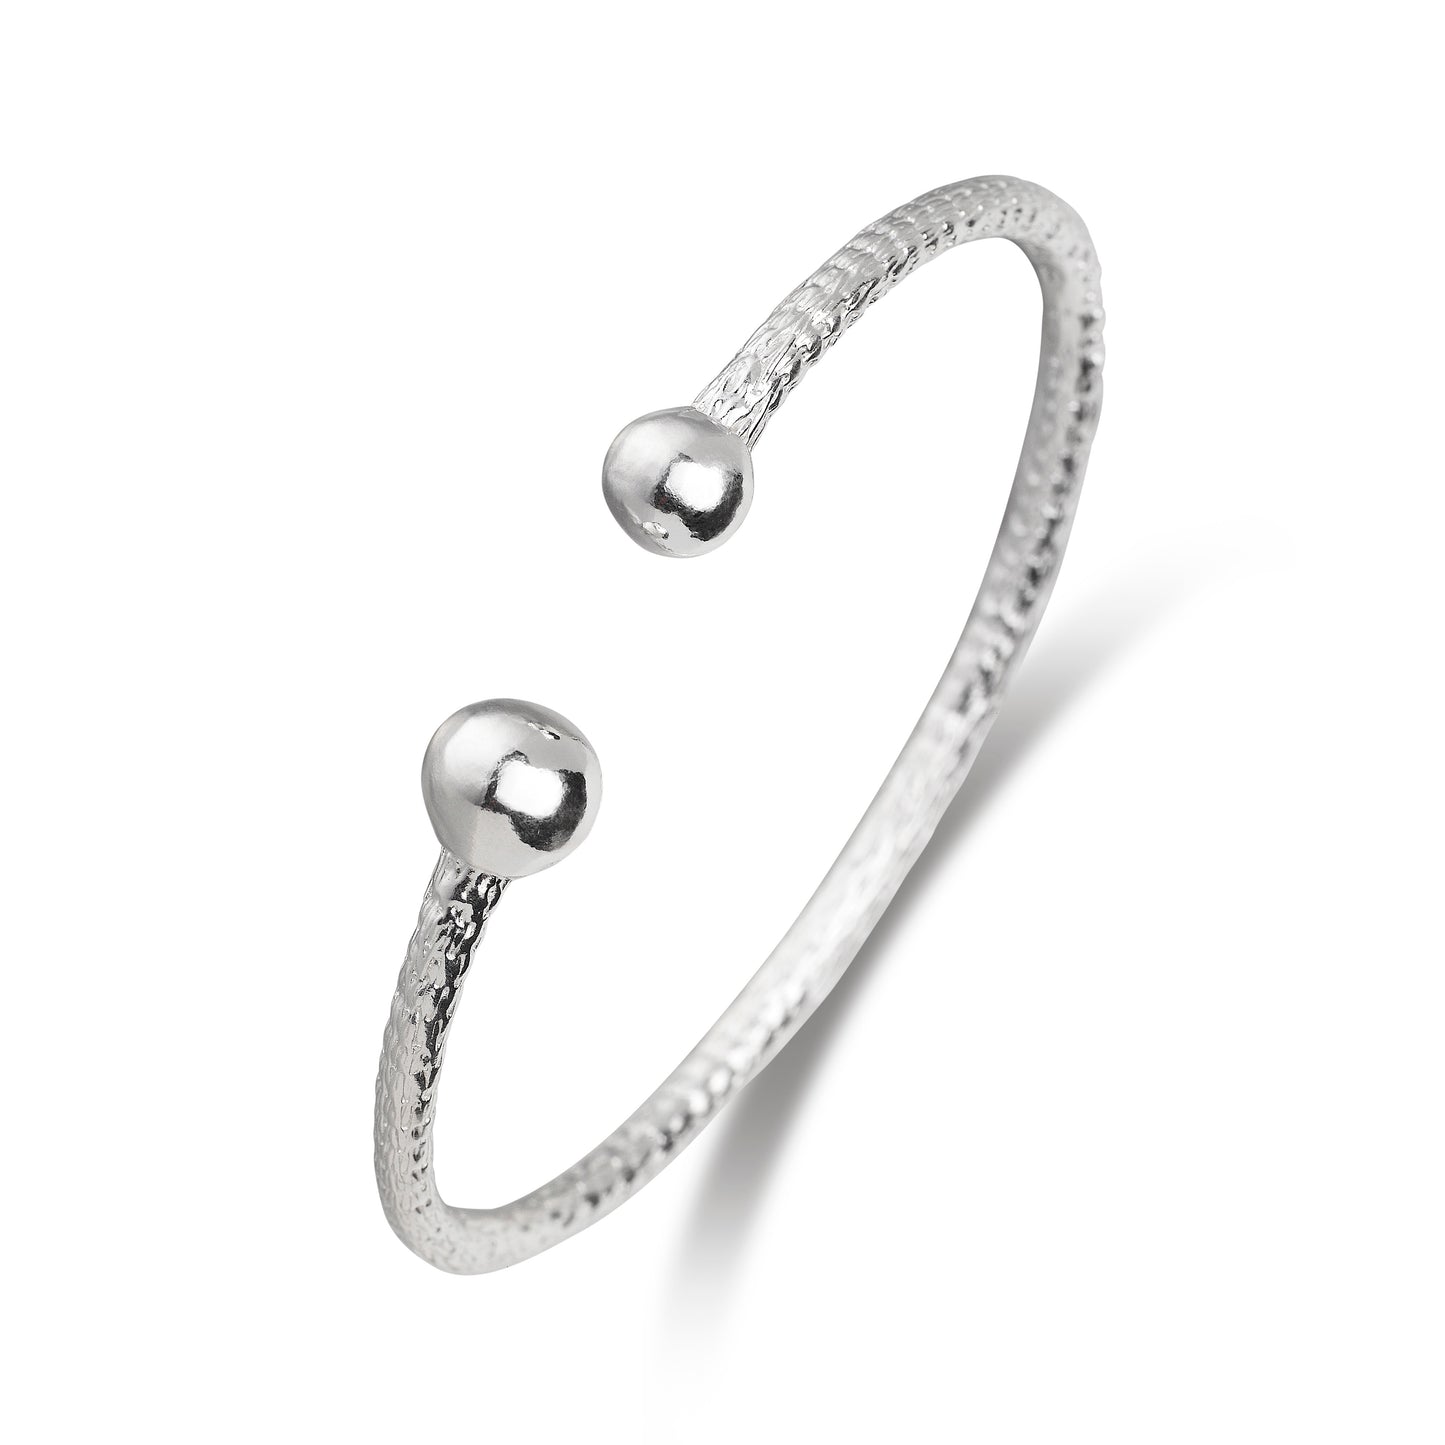 Better Jewelry .925 Sterling Silver Asymmetric Balls Bangles (1 Pair)